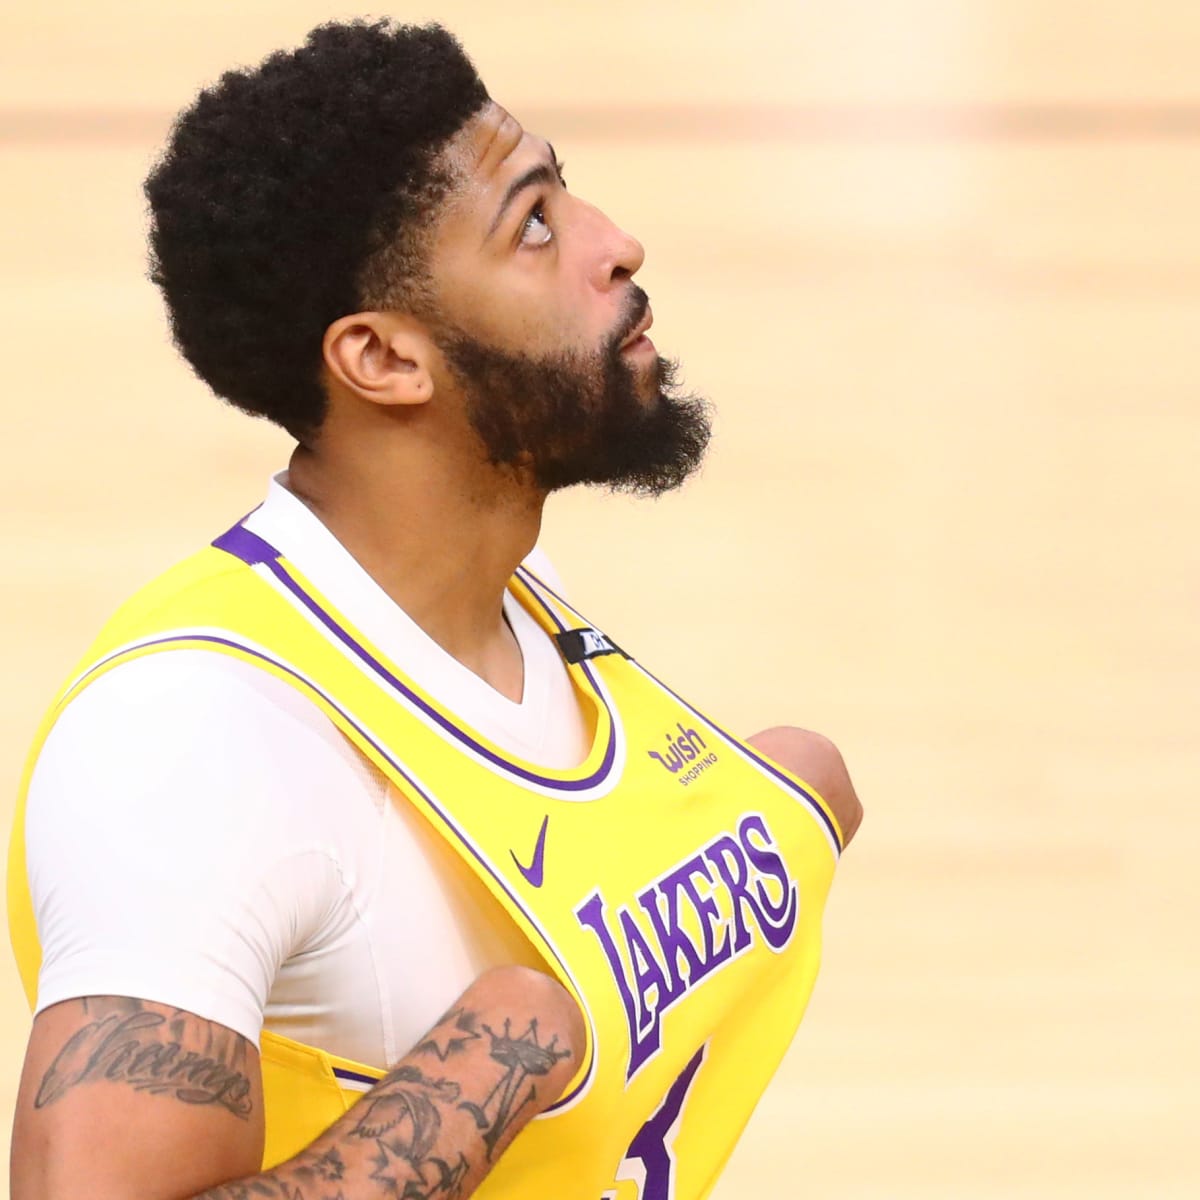 Anthony Davis admits 'no way' Lakers can win if he's this bad